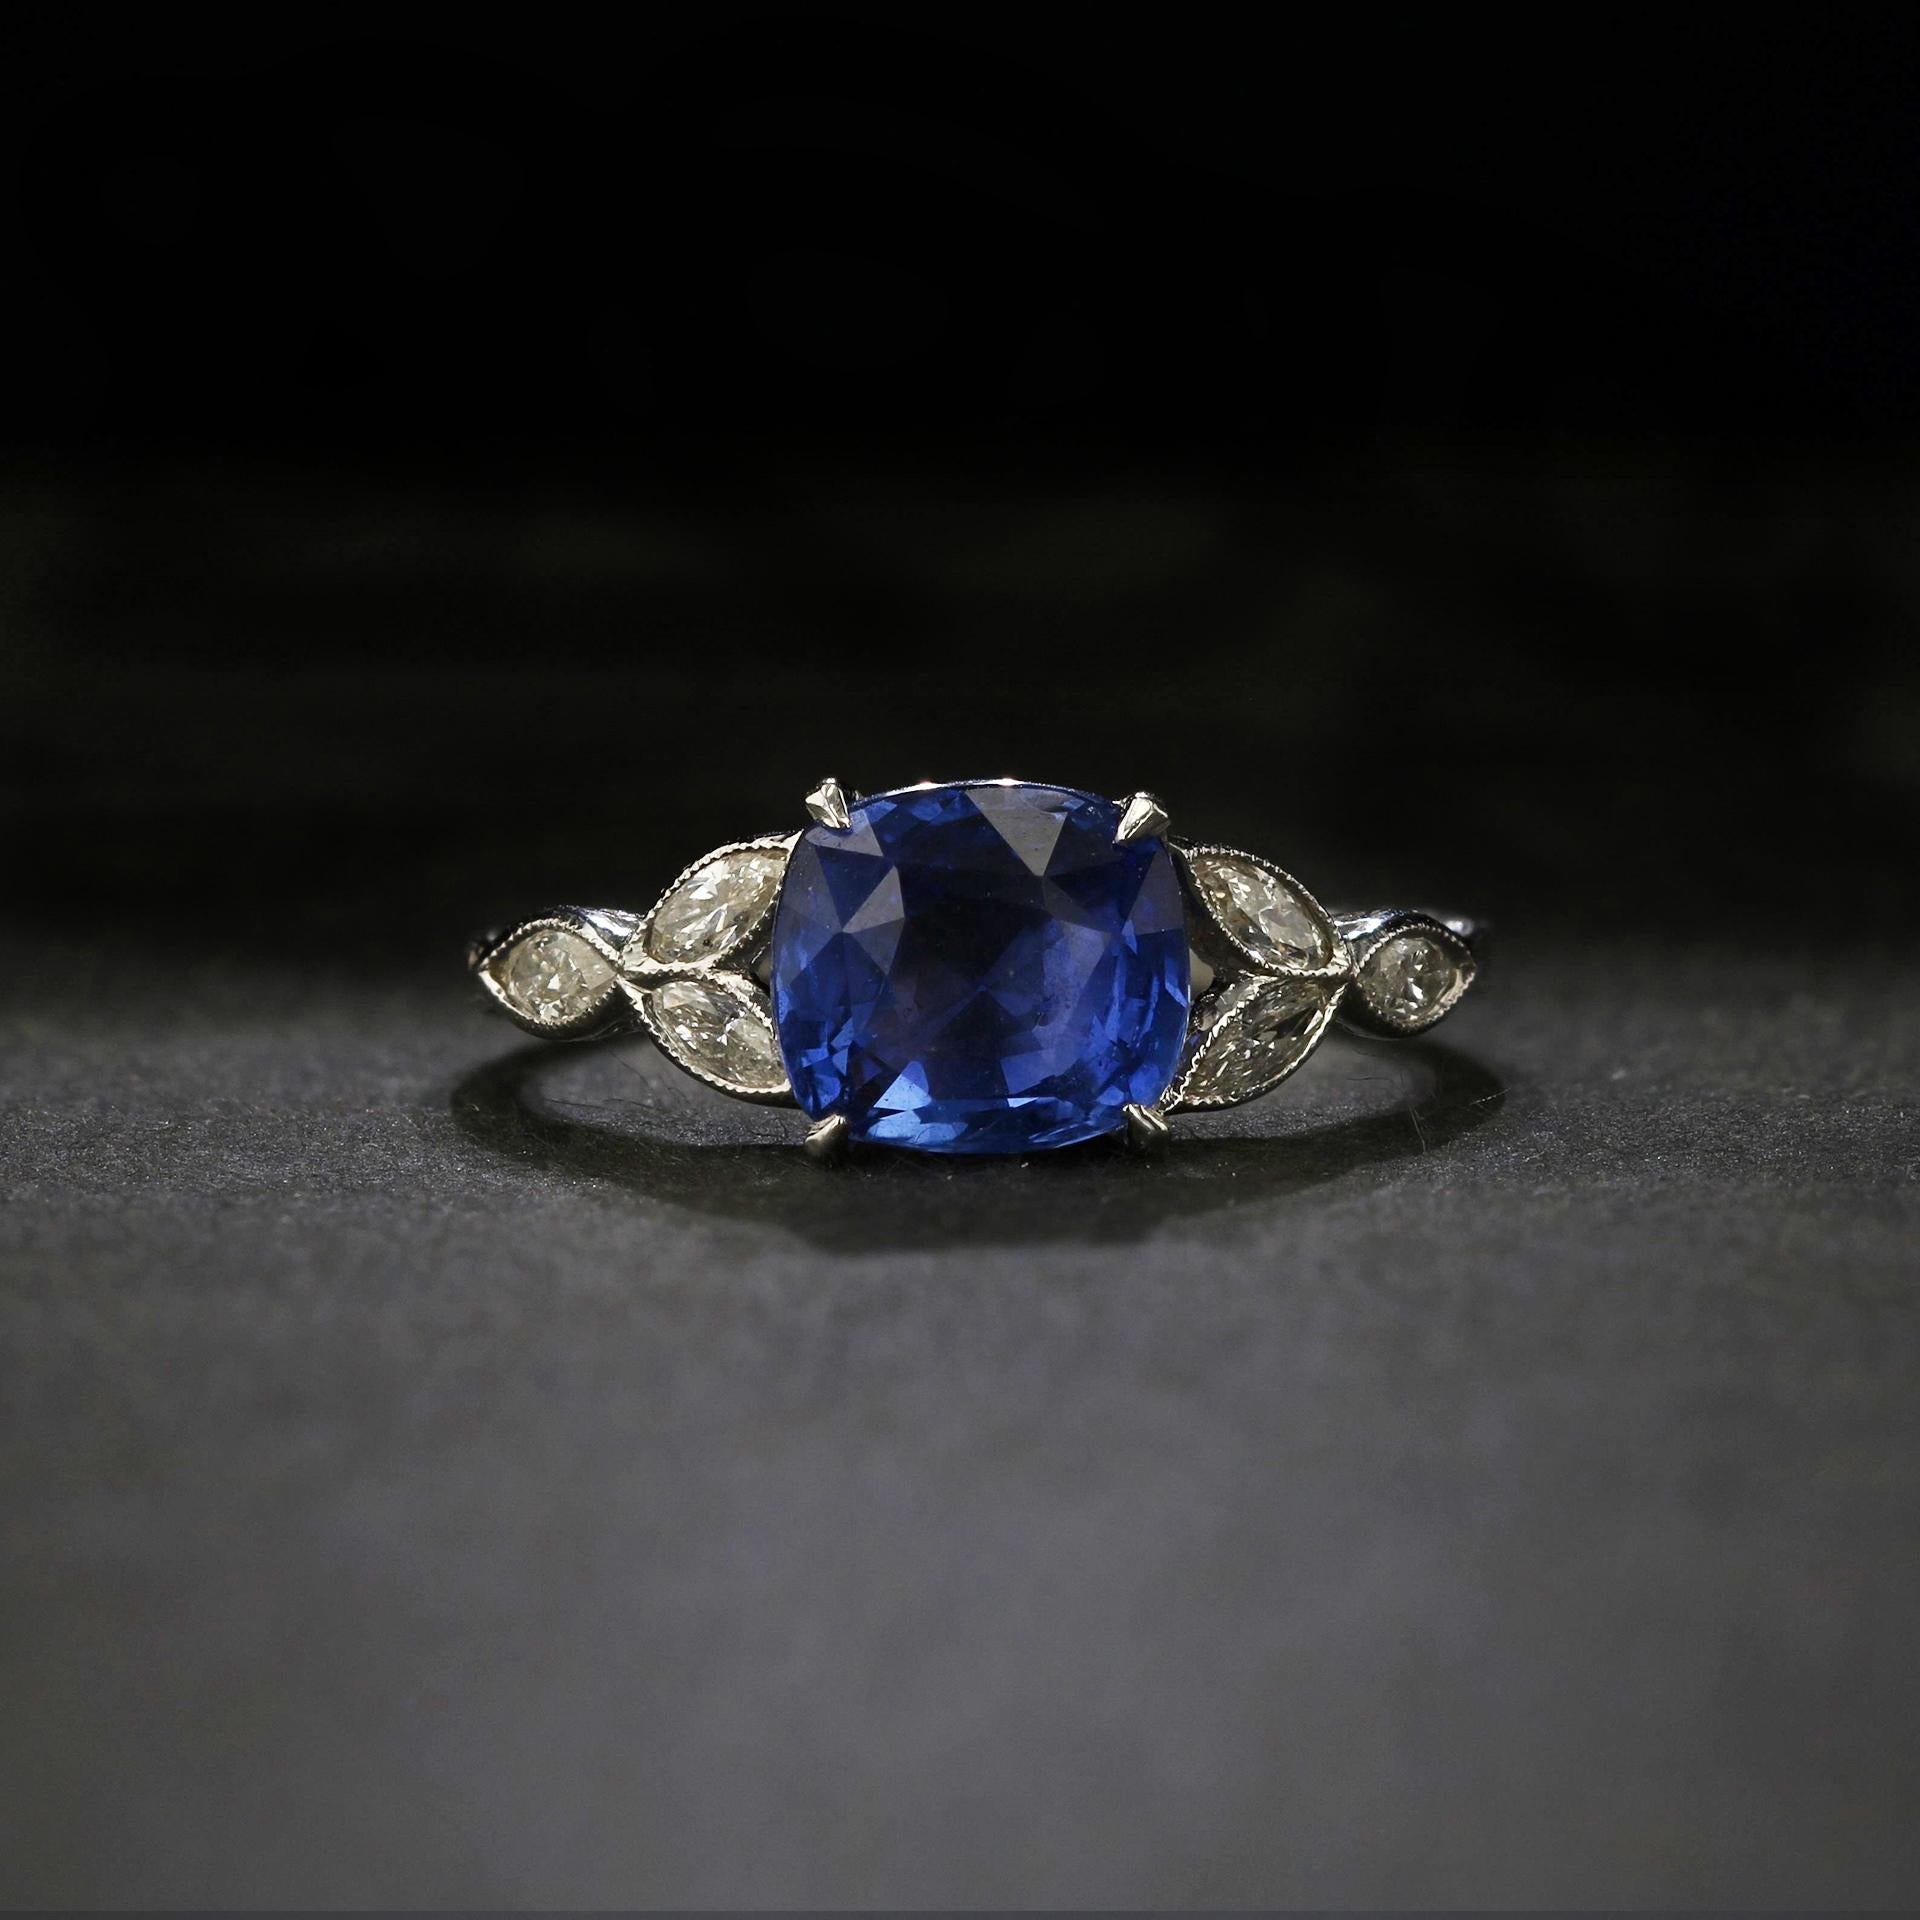 The rich blue of this cushion-shaped sapphire, weighing in at over two and a half carats, is delicately framed by a half dozen twinkling white marquise diamonds in fine millegrained bezel settings, all set against gleaming 14k white gold in an